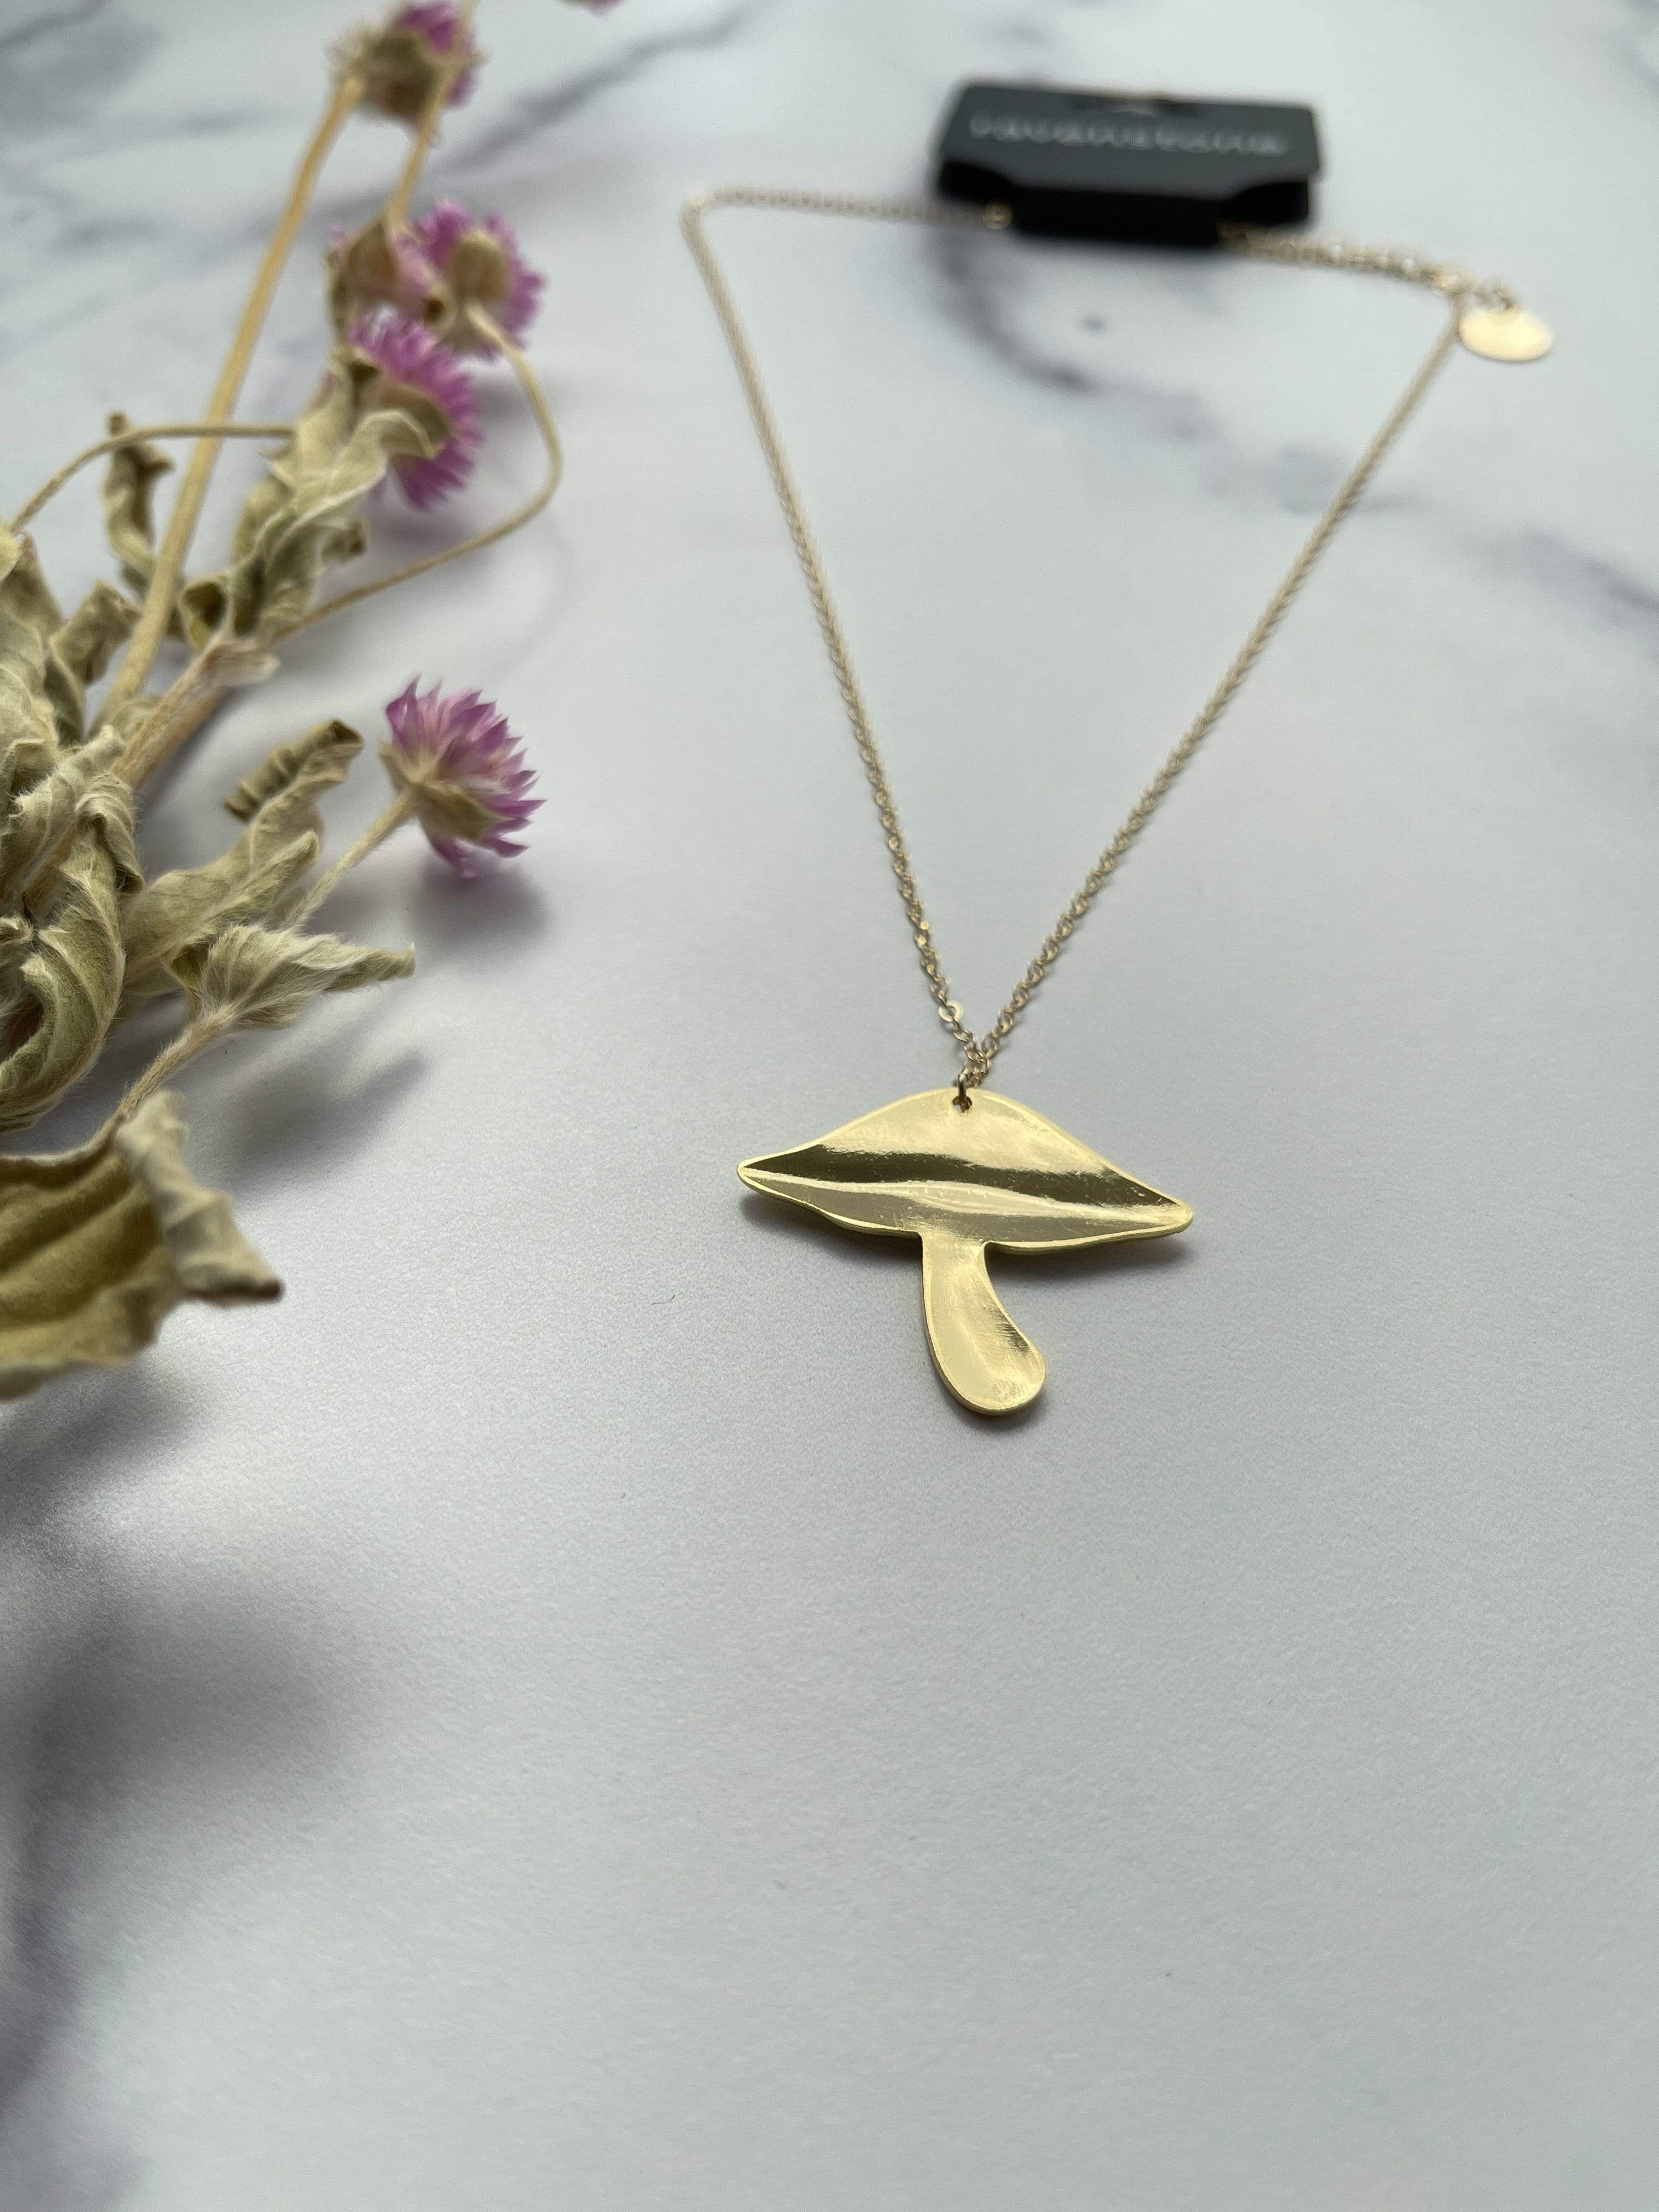 The Magical Mushroom Necklace (24k Gold Plated)